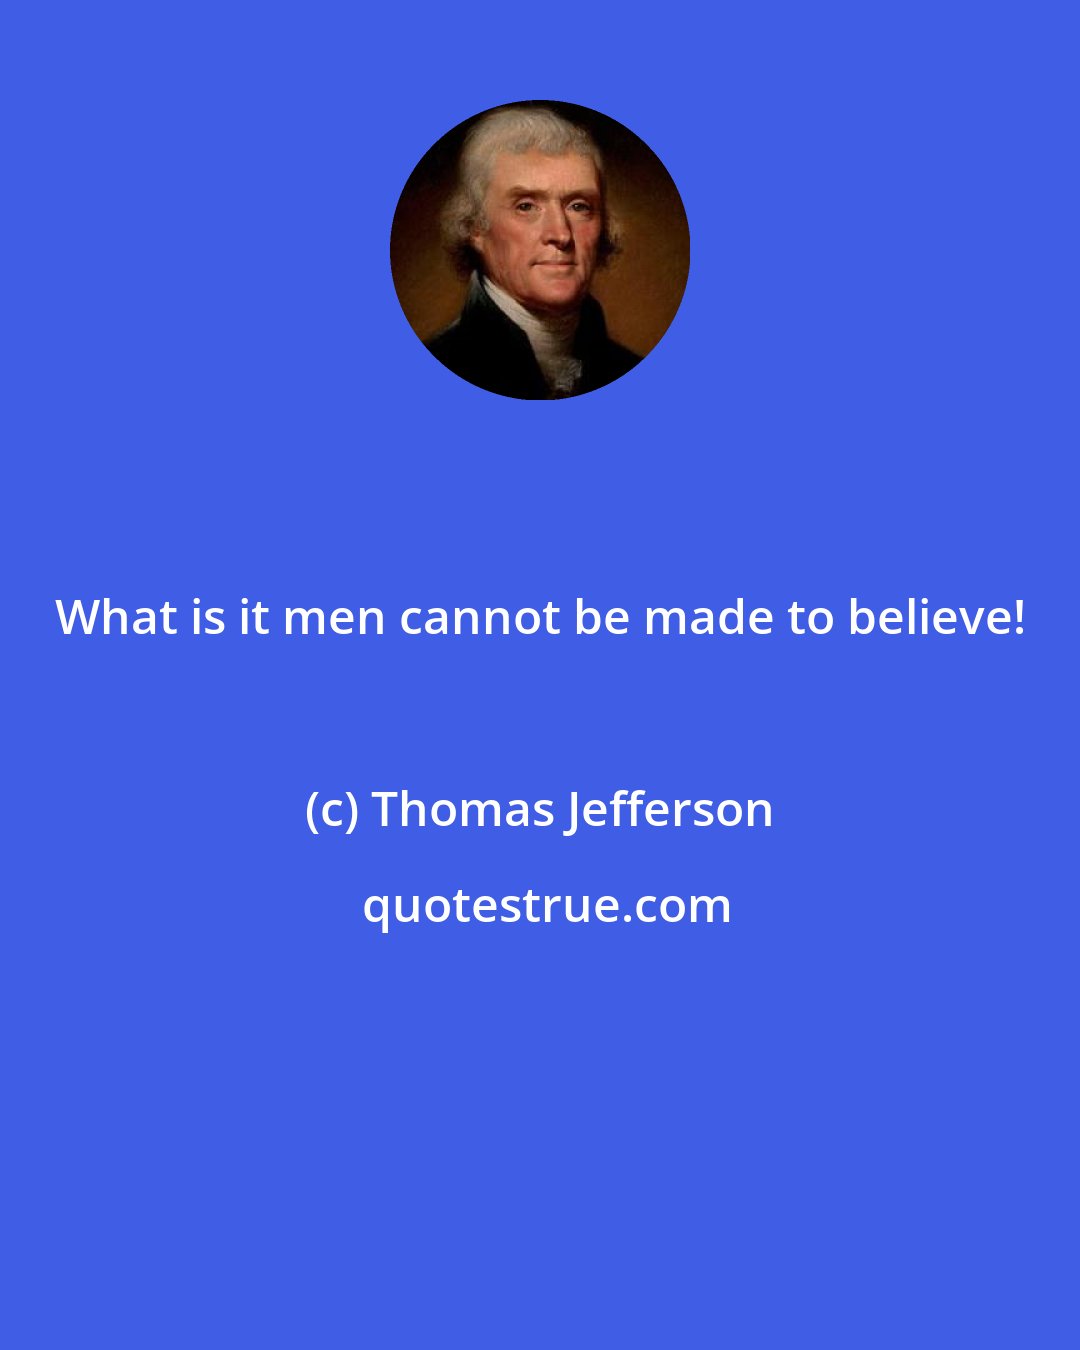 Thomas Jefferson: What is it men cannot be made to believe!